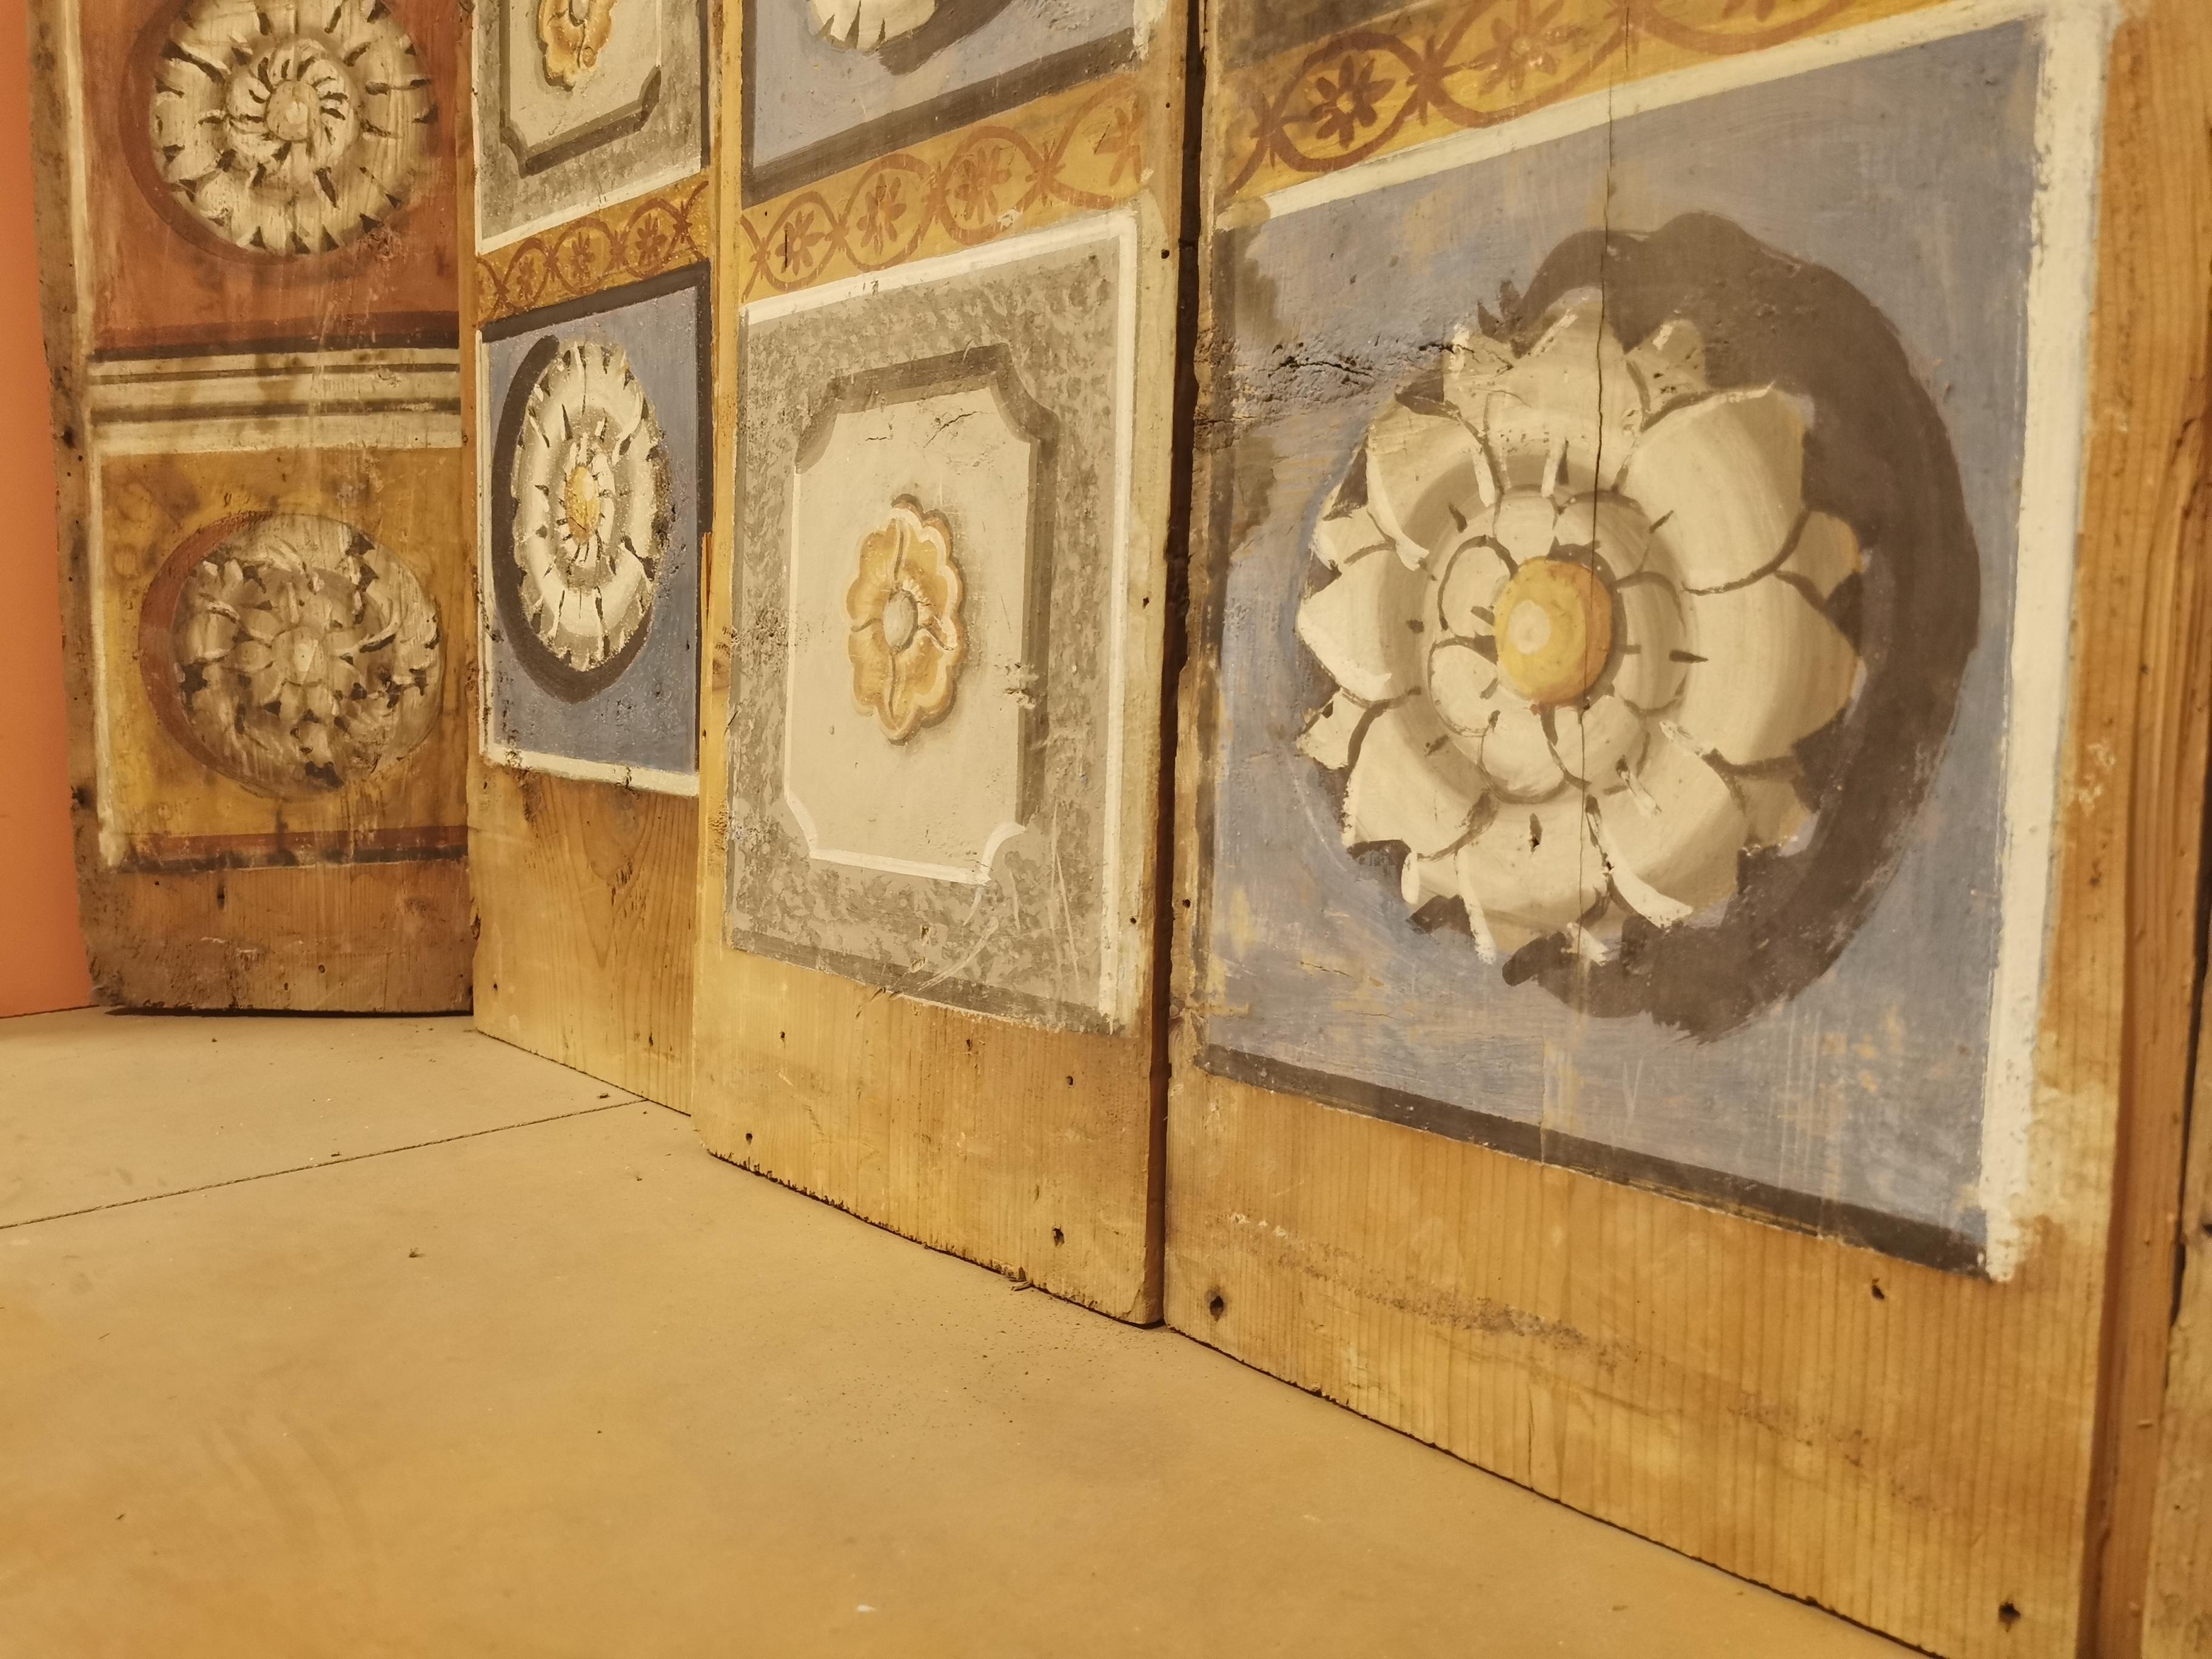 N. 55 fir ceiling boards, painted with tempera, showing geometrical and floral patterns.

This kind of ceiling boards were mounted on joists also decorated and painted.

Period: end 1600 beginning 1700
Provenance: Italy; Marche region

They